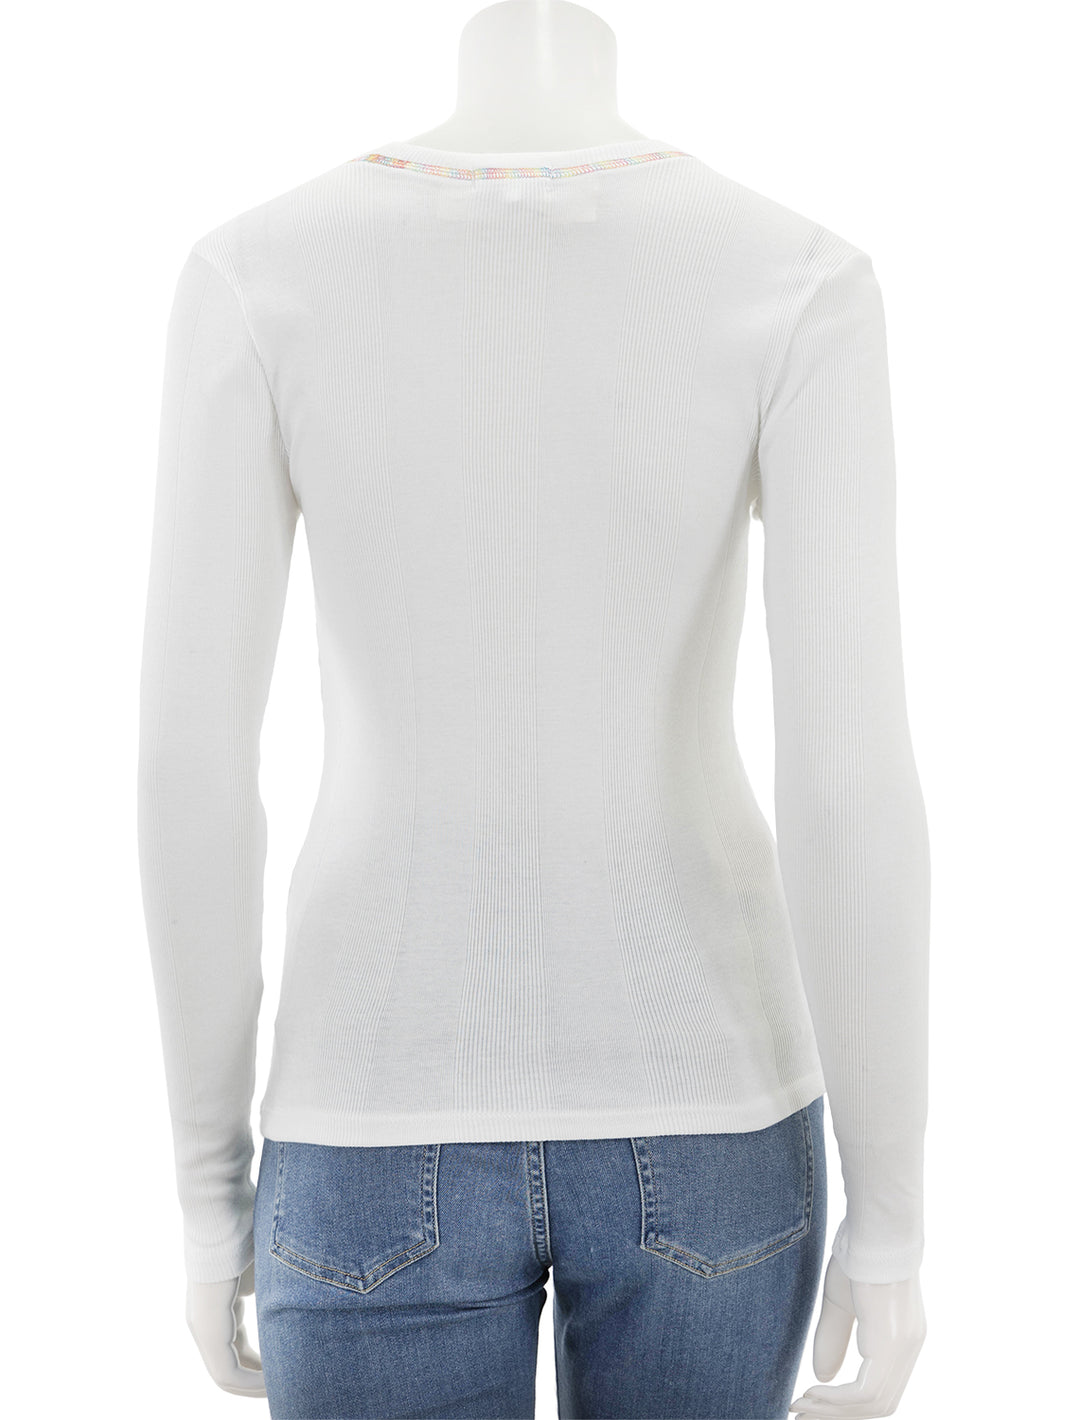 Back view of Goldie Lewinter's rainbow stitch long sleeve cotton rib tee in white.